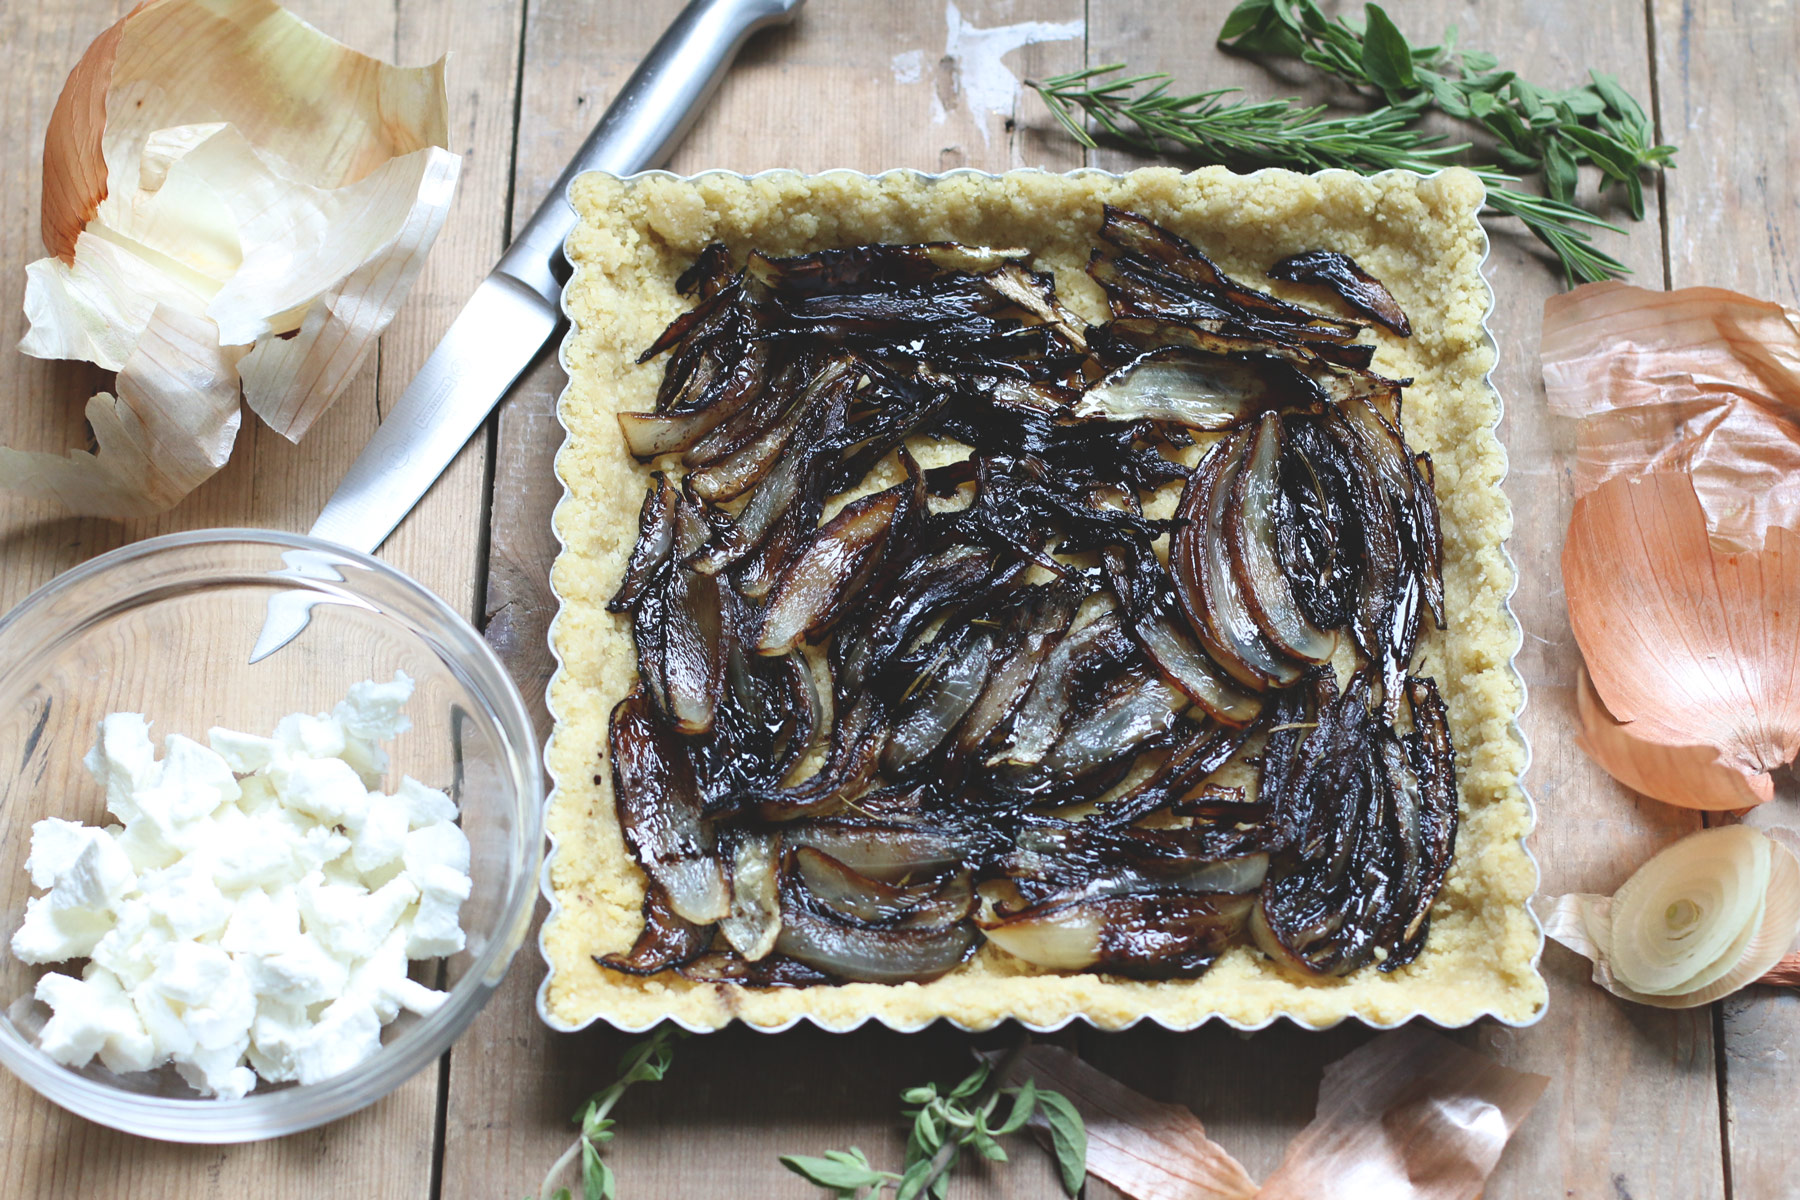 Gluten Free Tart with Caramelized Onion and goat cheese